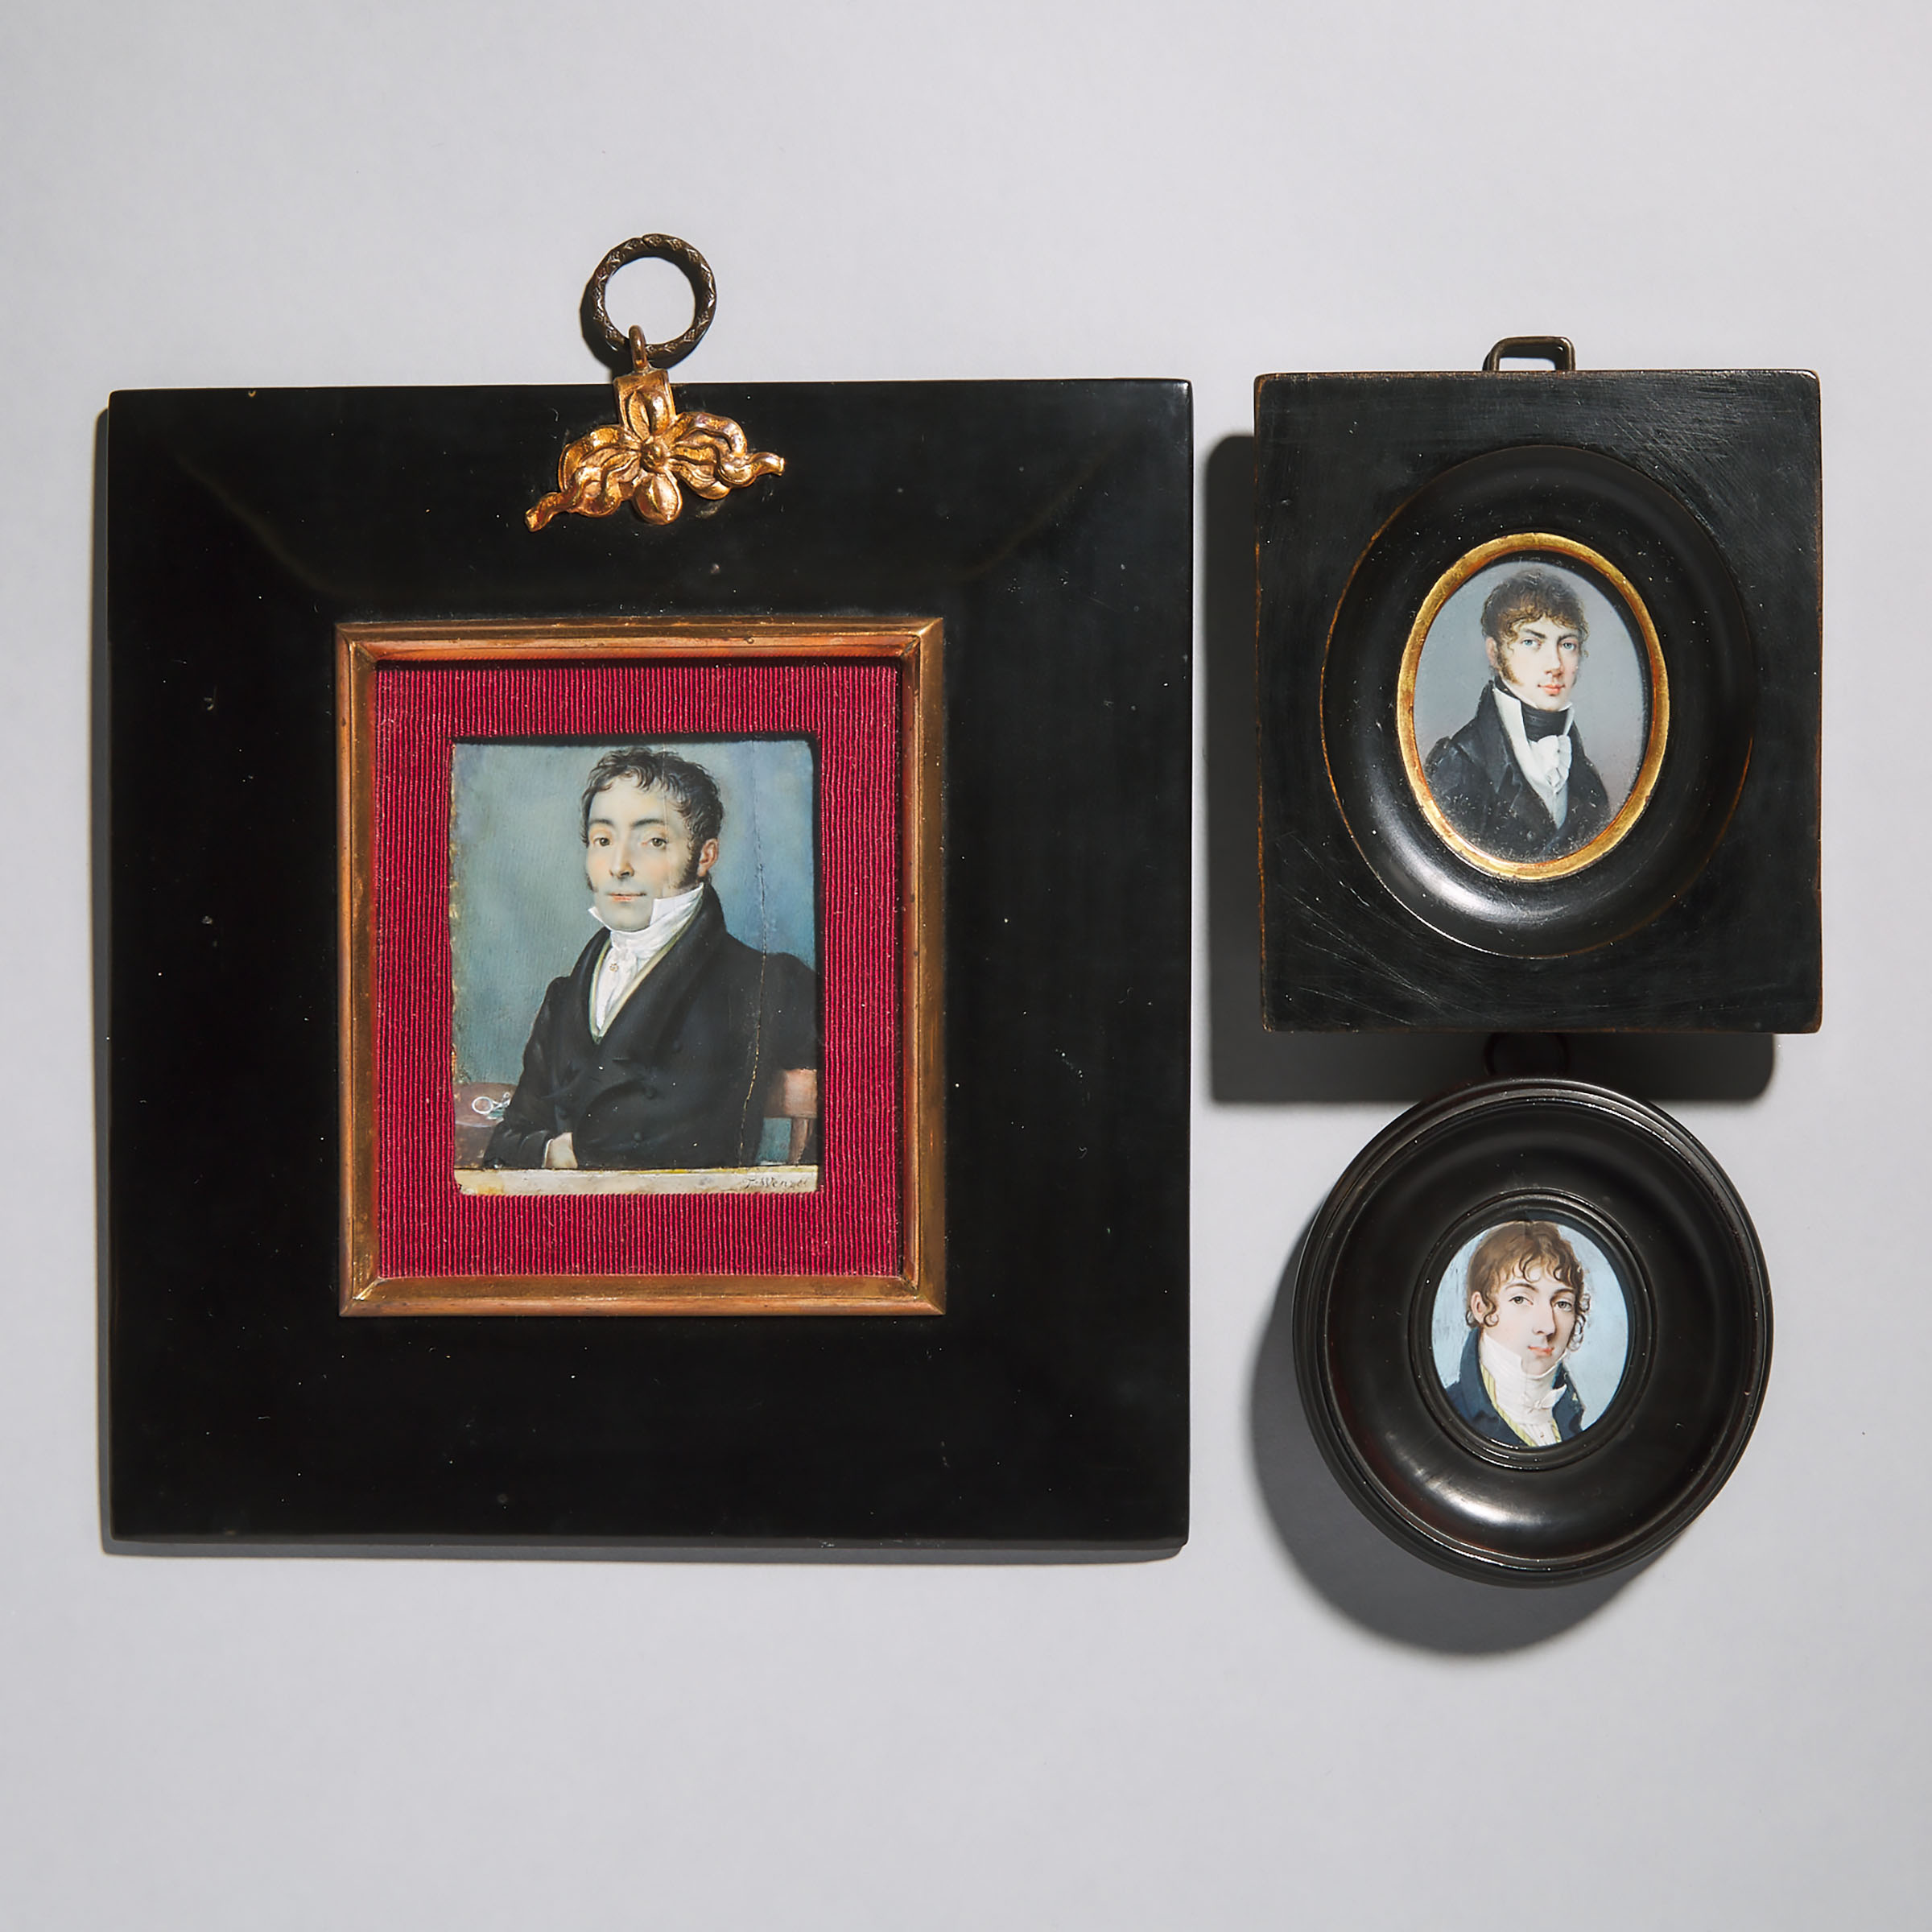 Three Portrait Miniatures of Young Gentlemen, early-mid 19th century